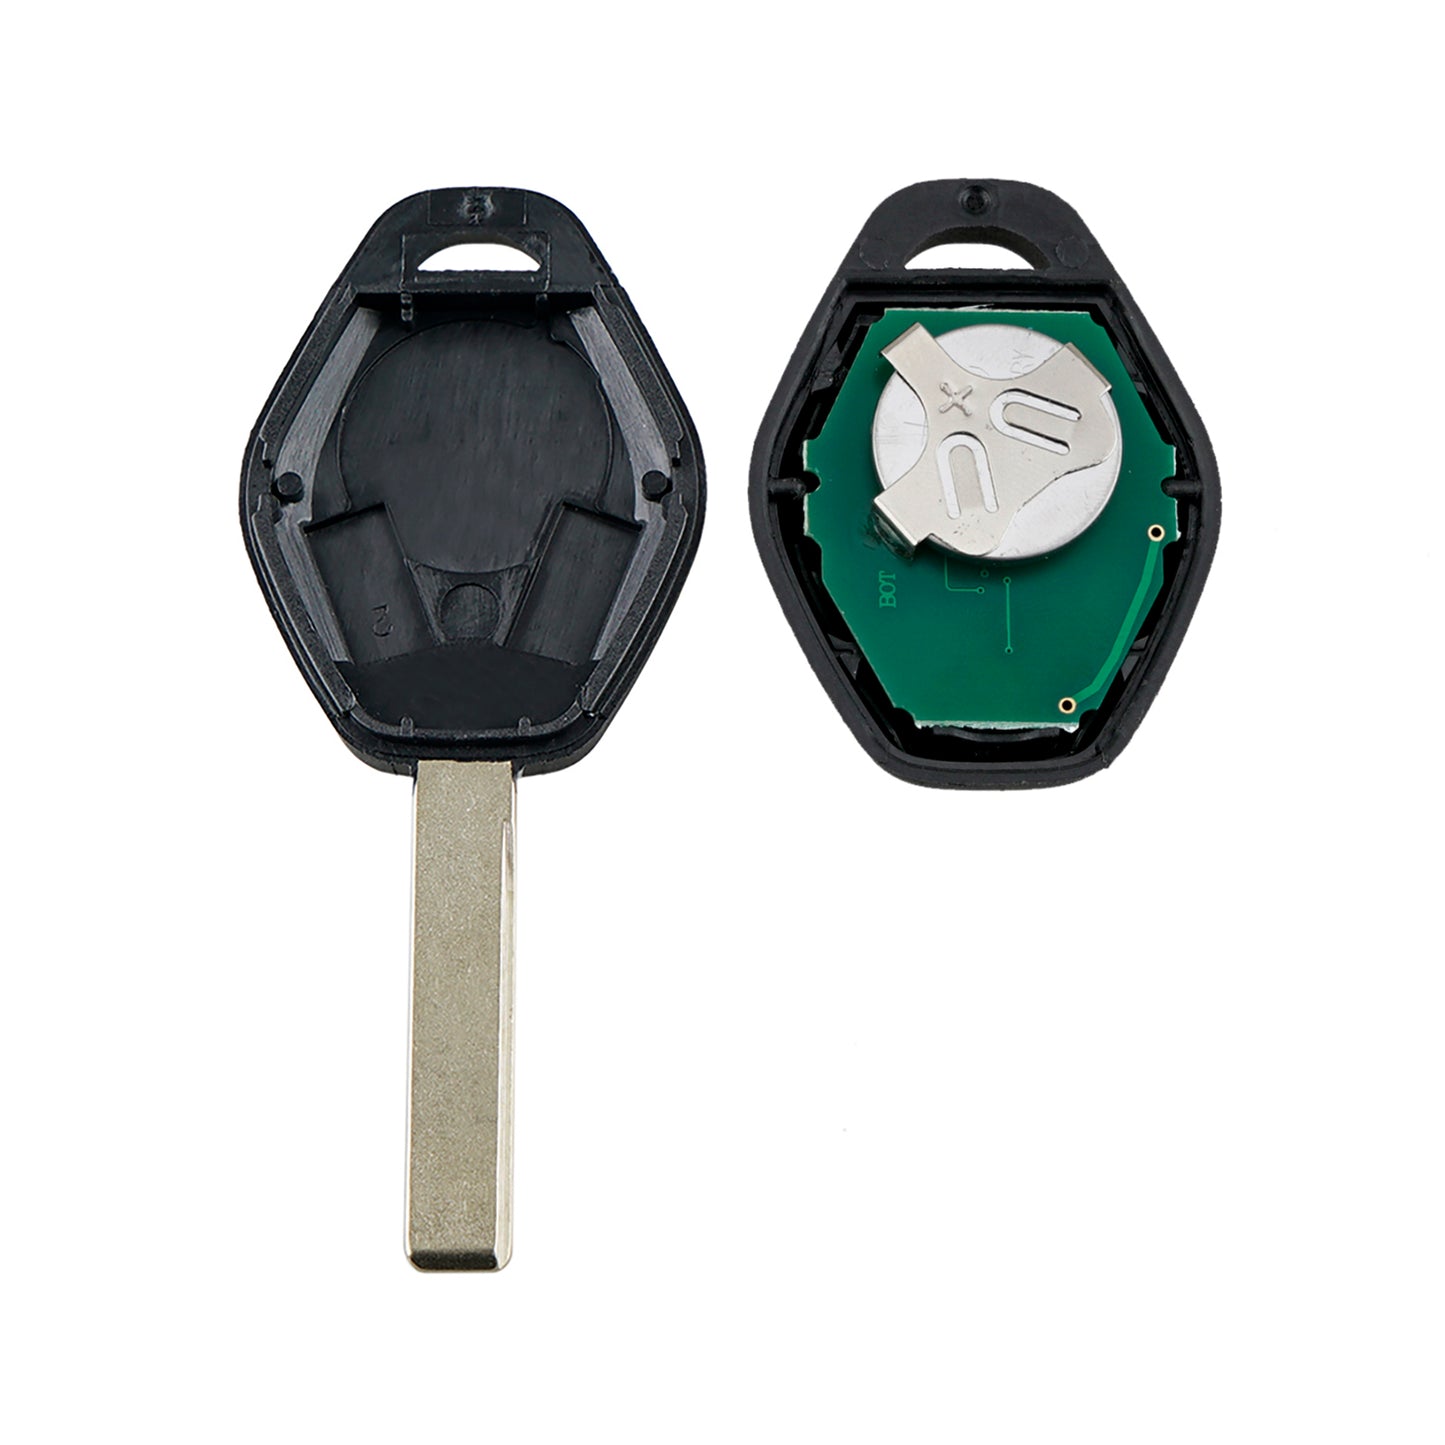 3 Buttons 315MHz Keyless Entry Fob Remote Car Key For 2000-2008 BMW Serie 3- Seriees X3 X5 M3 Z4  FCC ID :LX8FZV SKU:J603